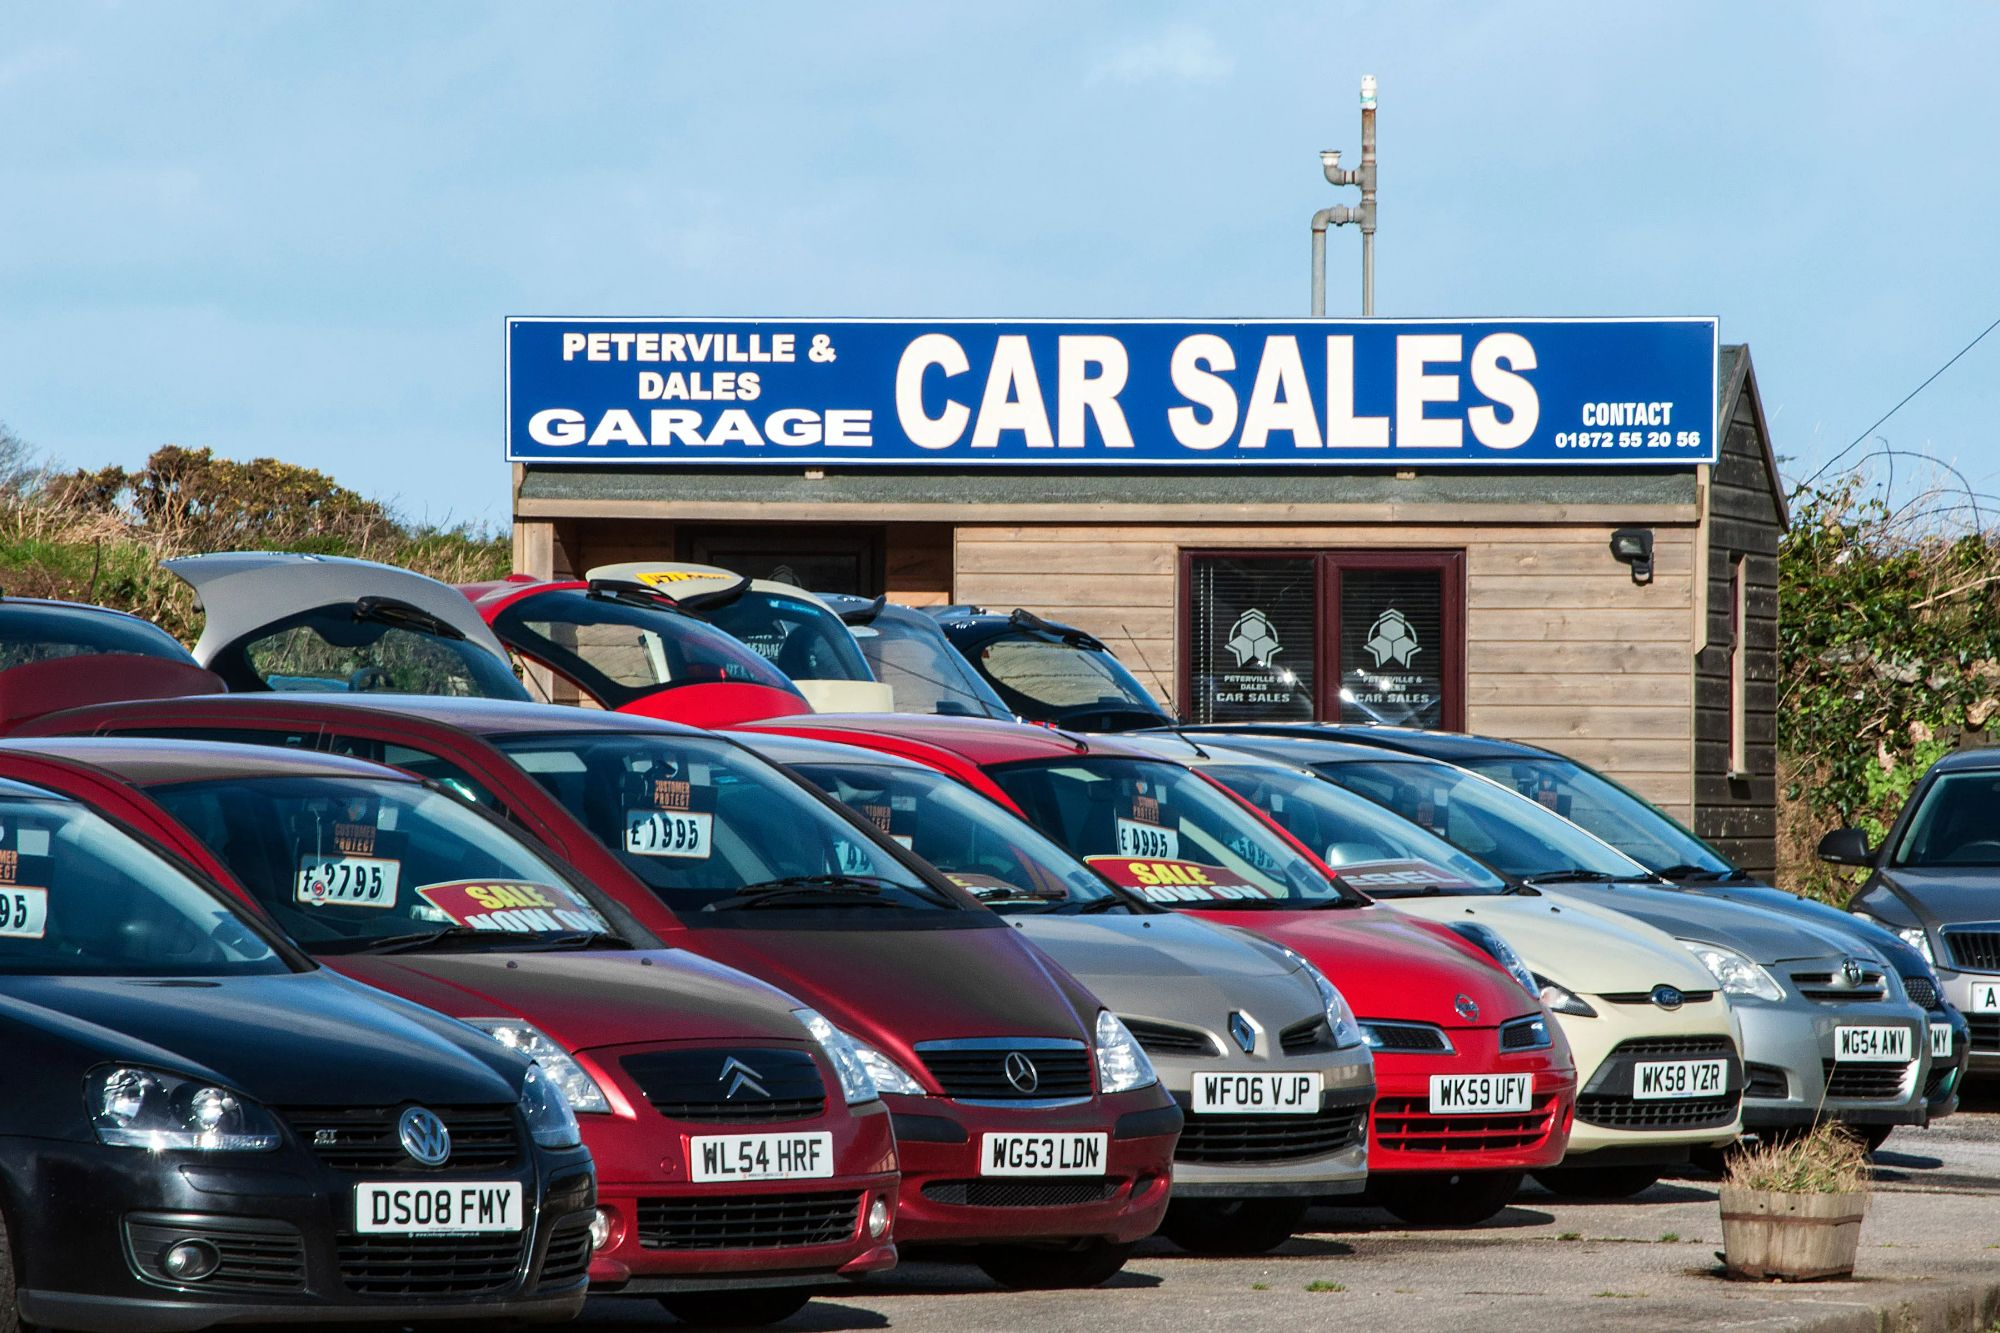 UK's fastest-selling used car revealed takes just 11 days to fly off forecourts